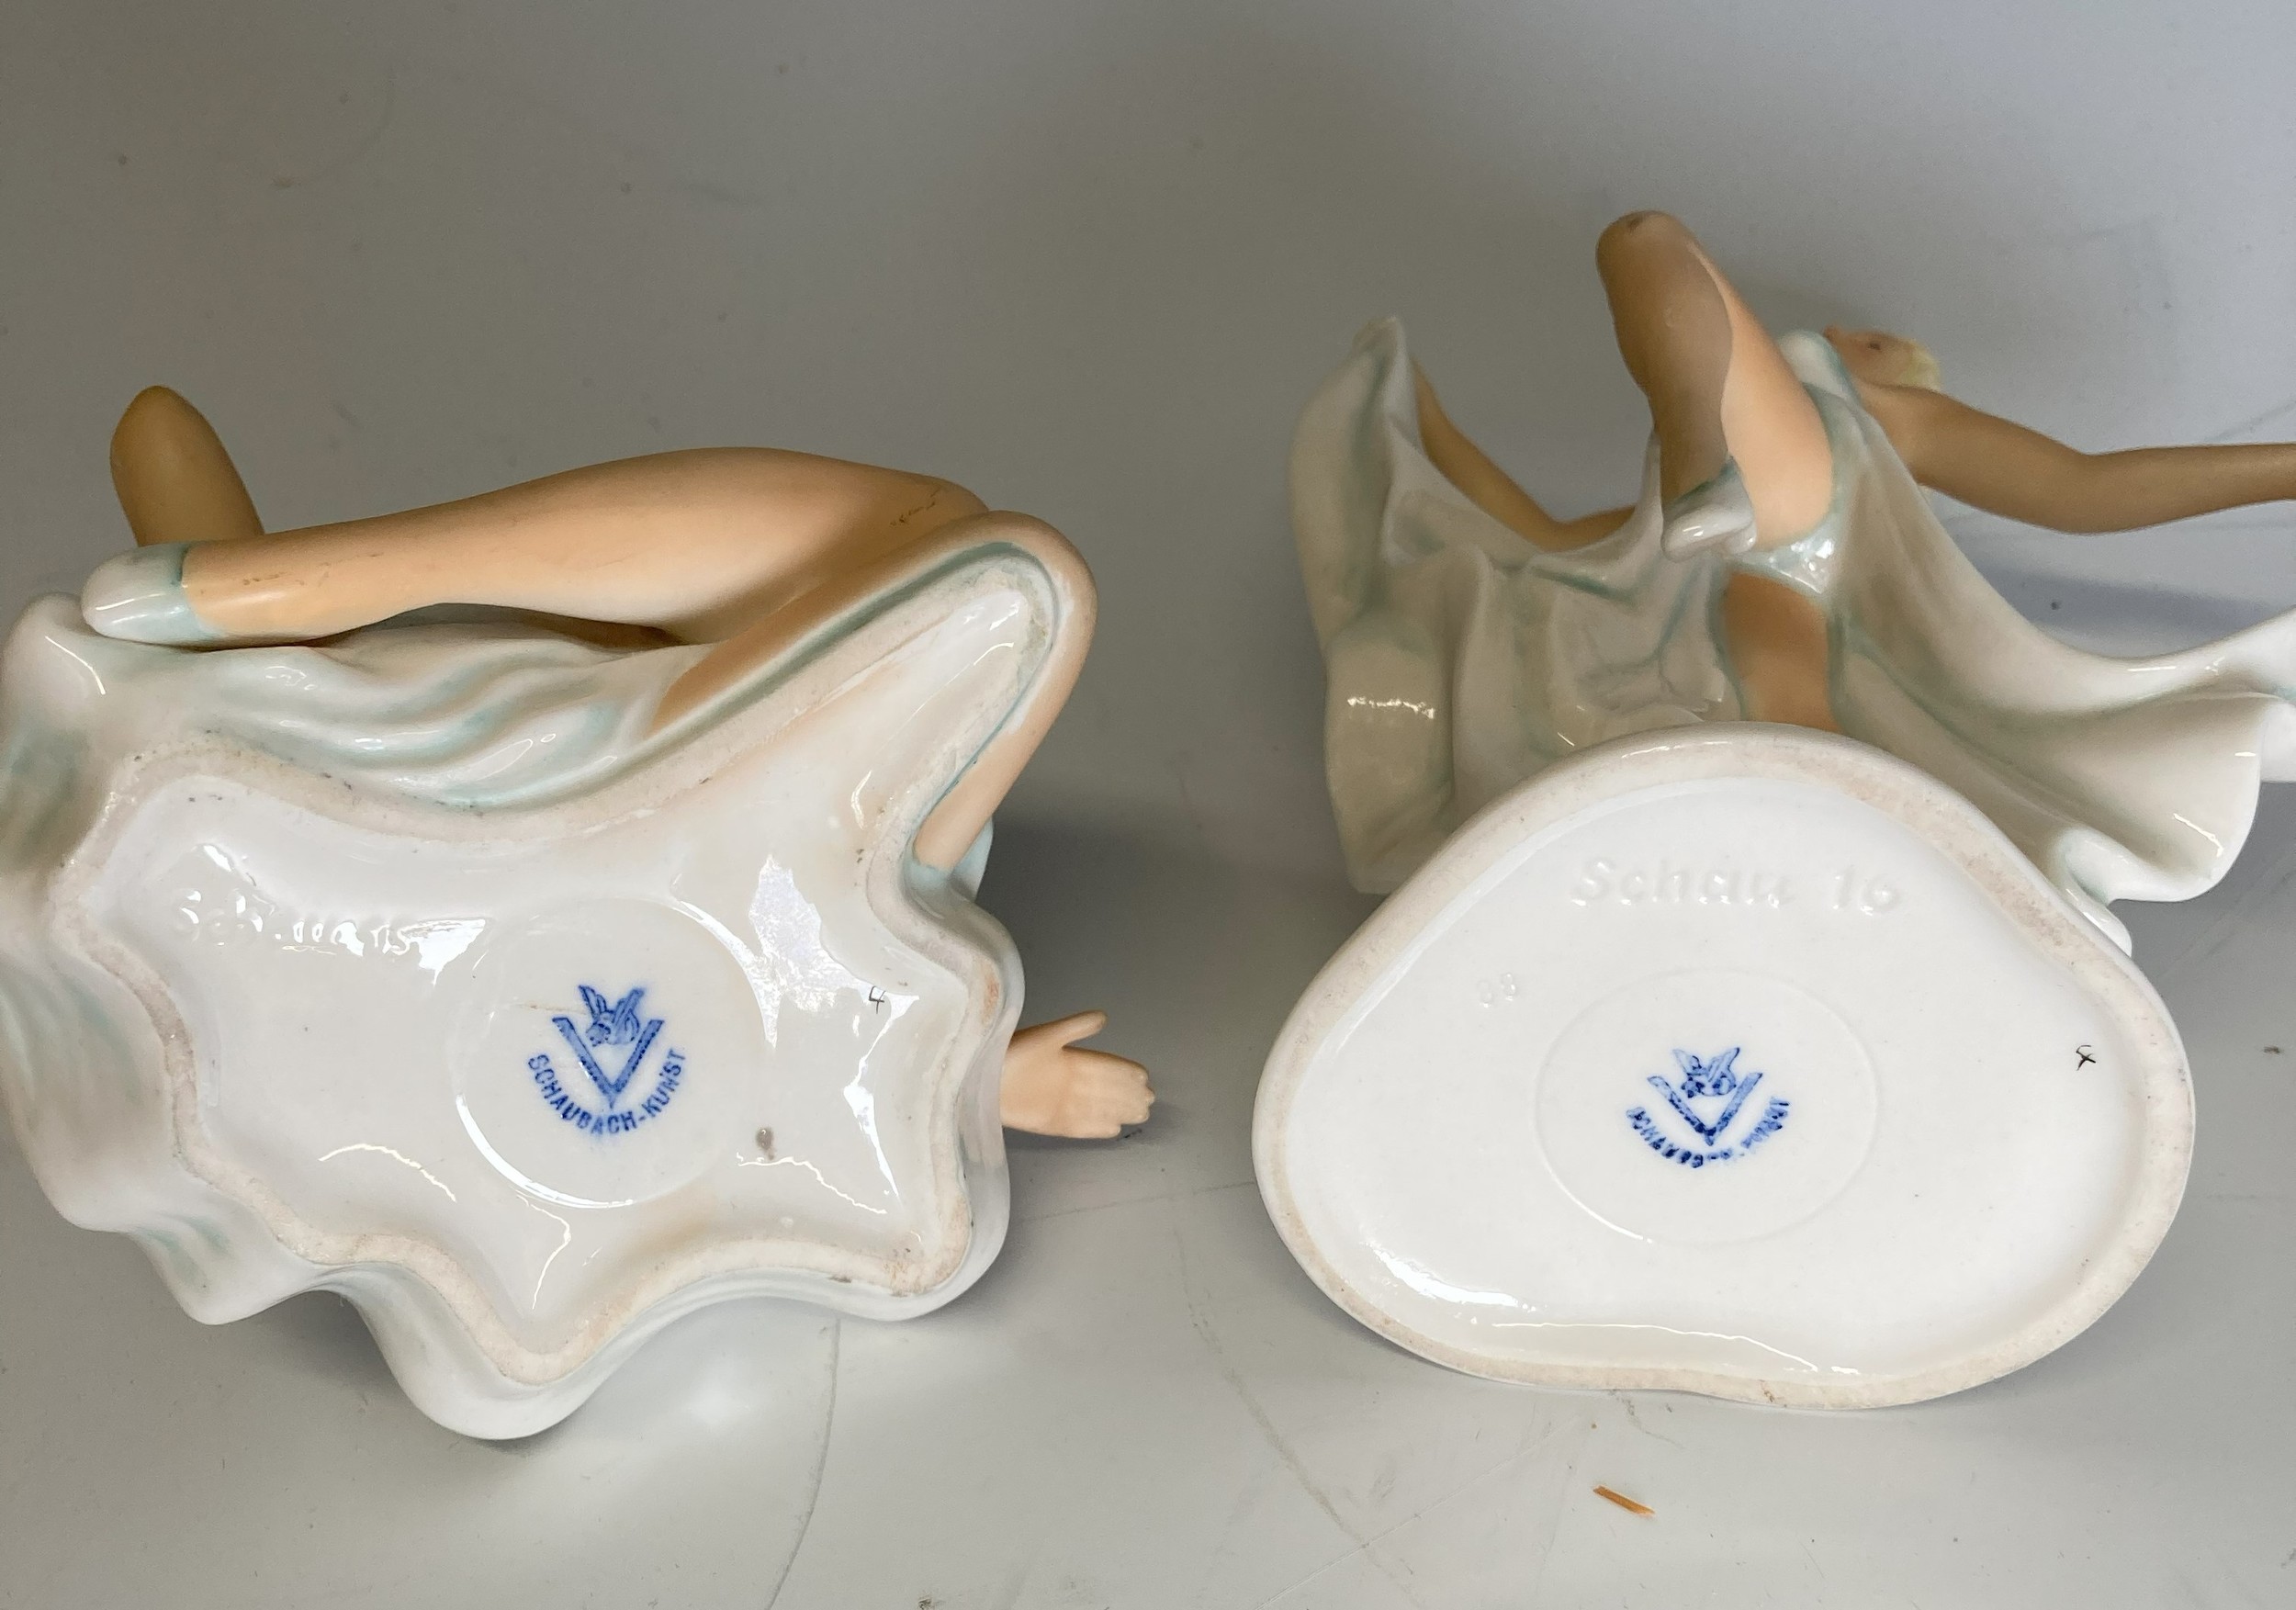 Marilyn Monroe interest: two Schaubach Kunst porcelain figurines of Marilyn Monroe, one seated, 12cm - Image 2 of 2